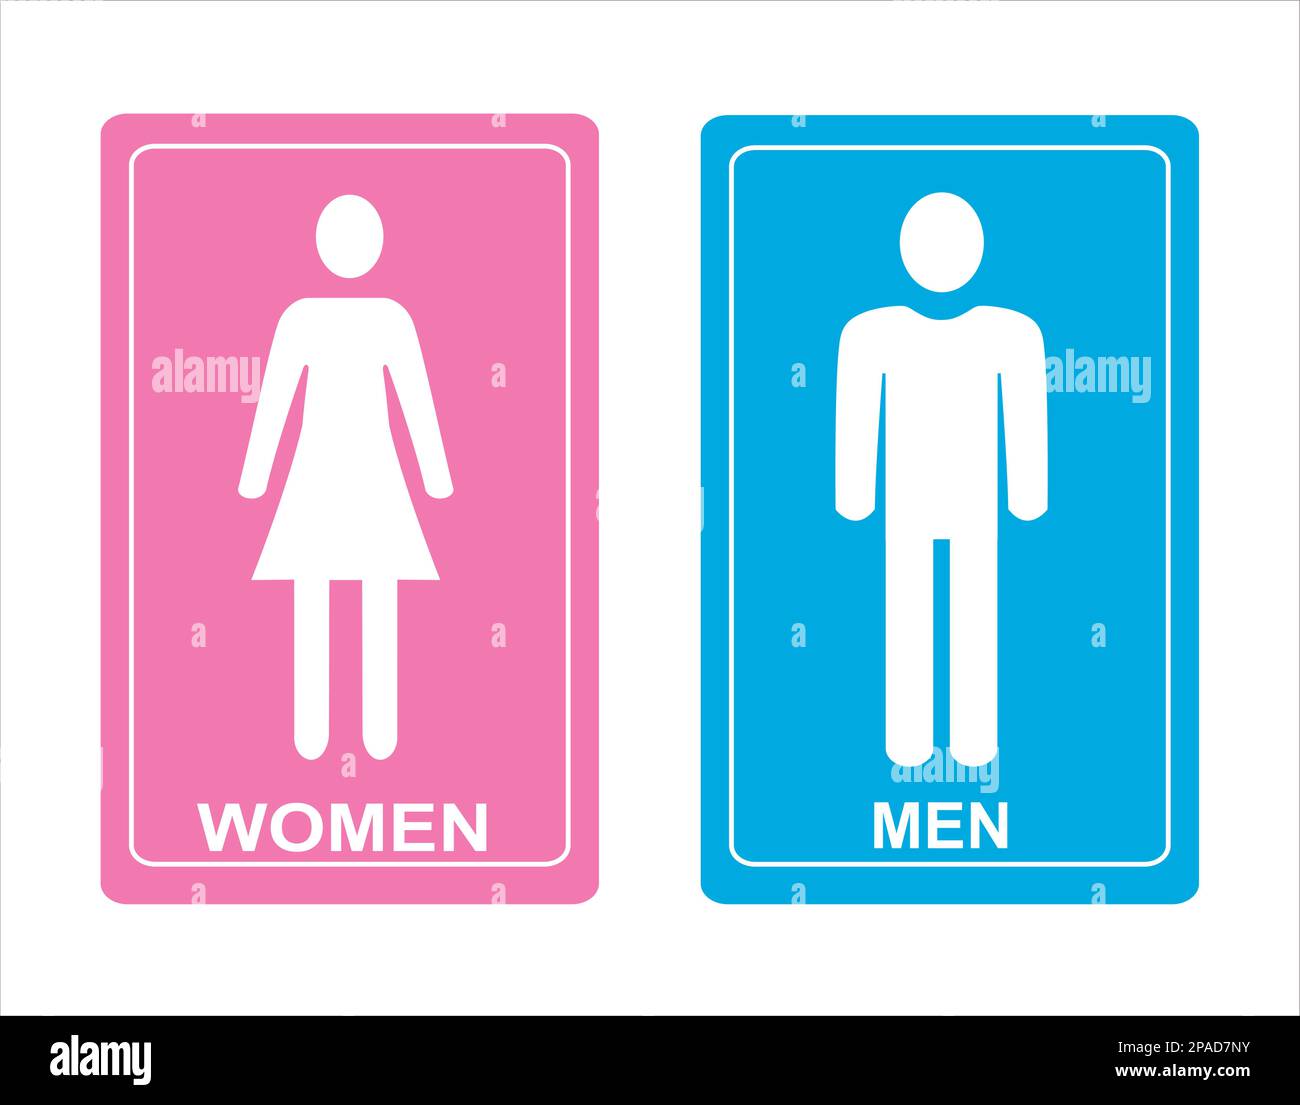 Men Women restroom sign white silhouette with pink and blue background. Vector Stock Vector